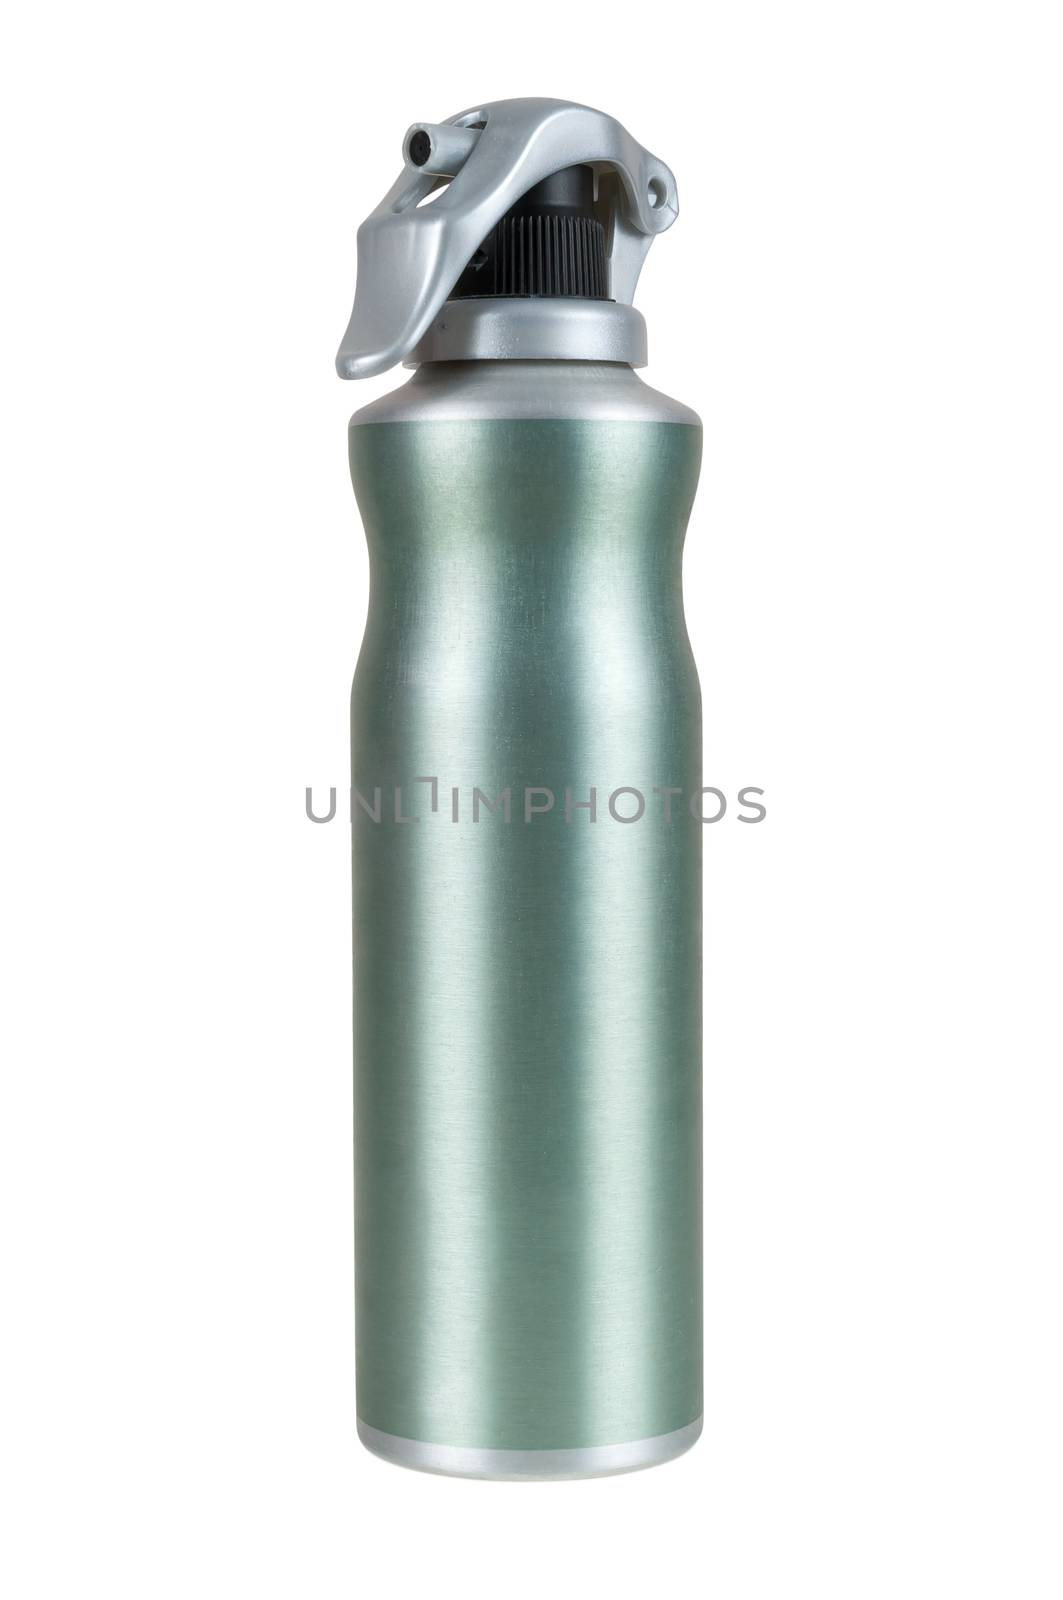 Green spray can on white background by mkos83